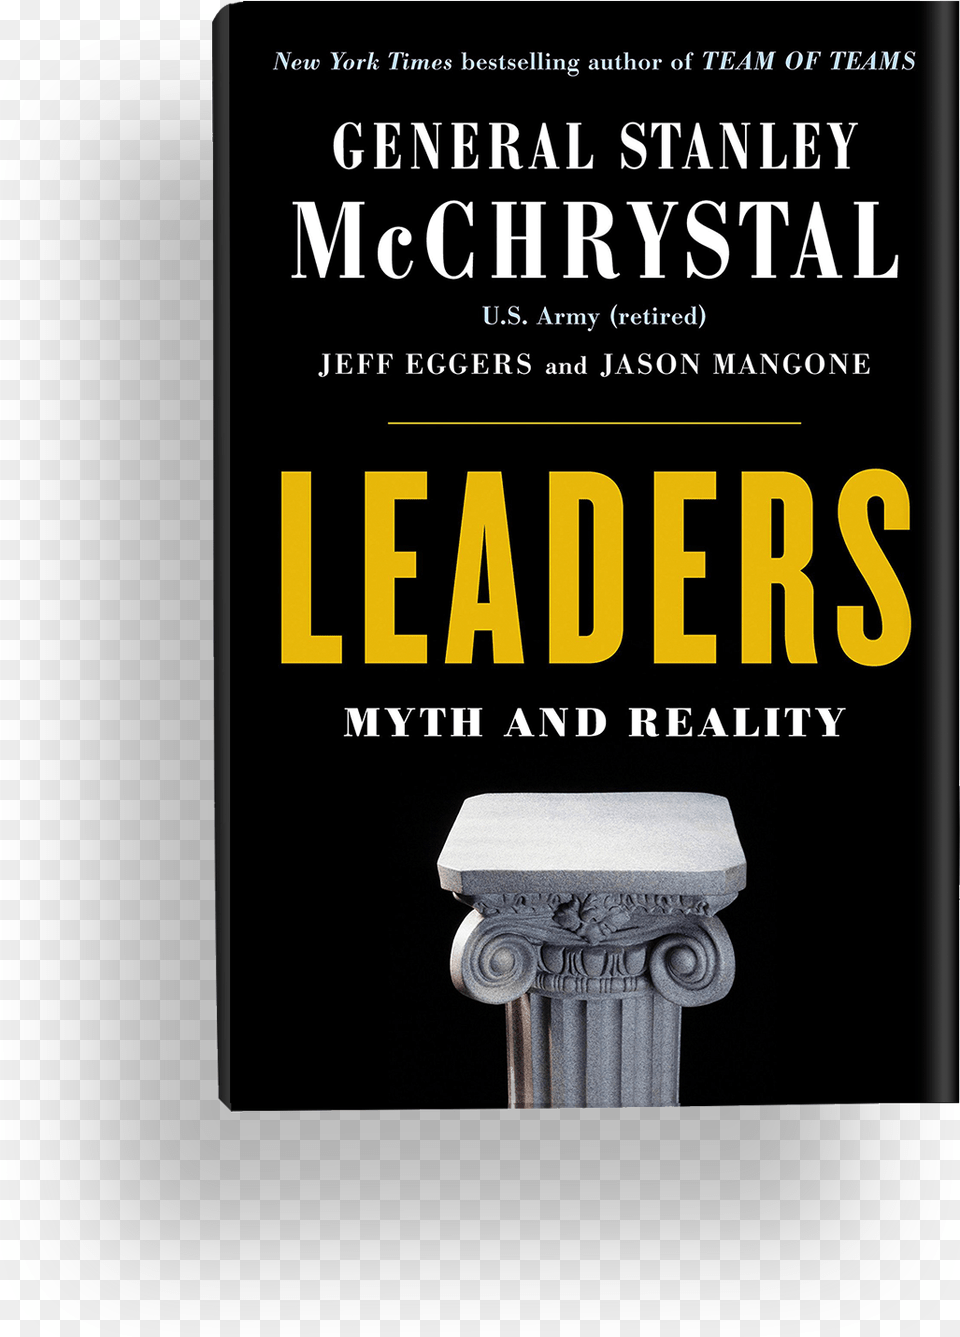 Myth And Reality Leaders Myth And Reality, Book, Publication, Novel Free Transparent Png